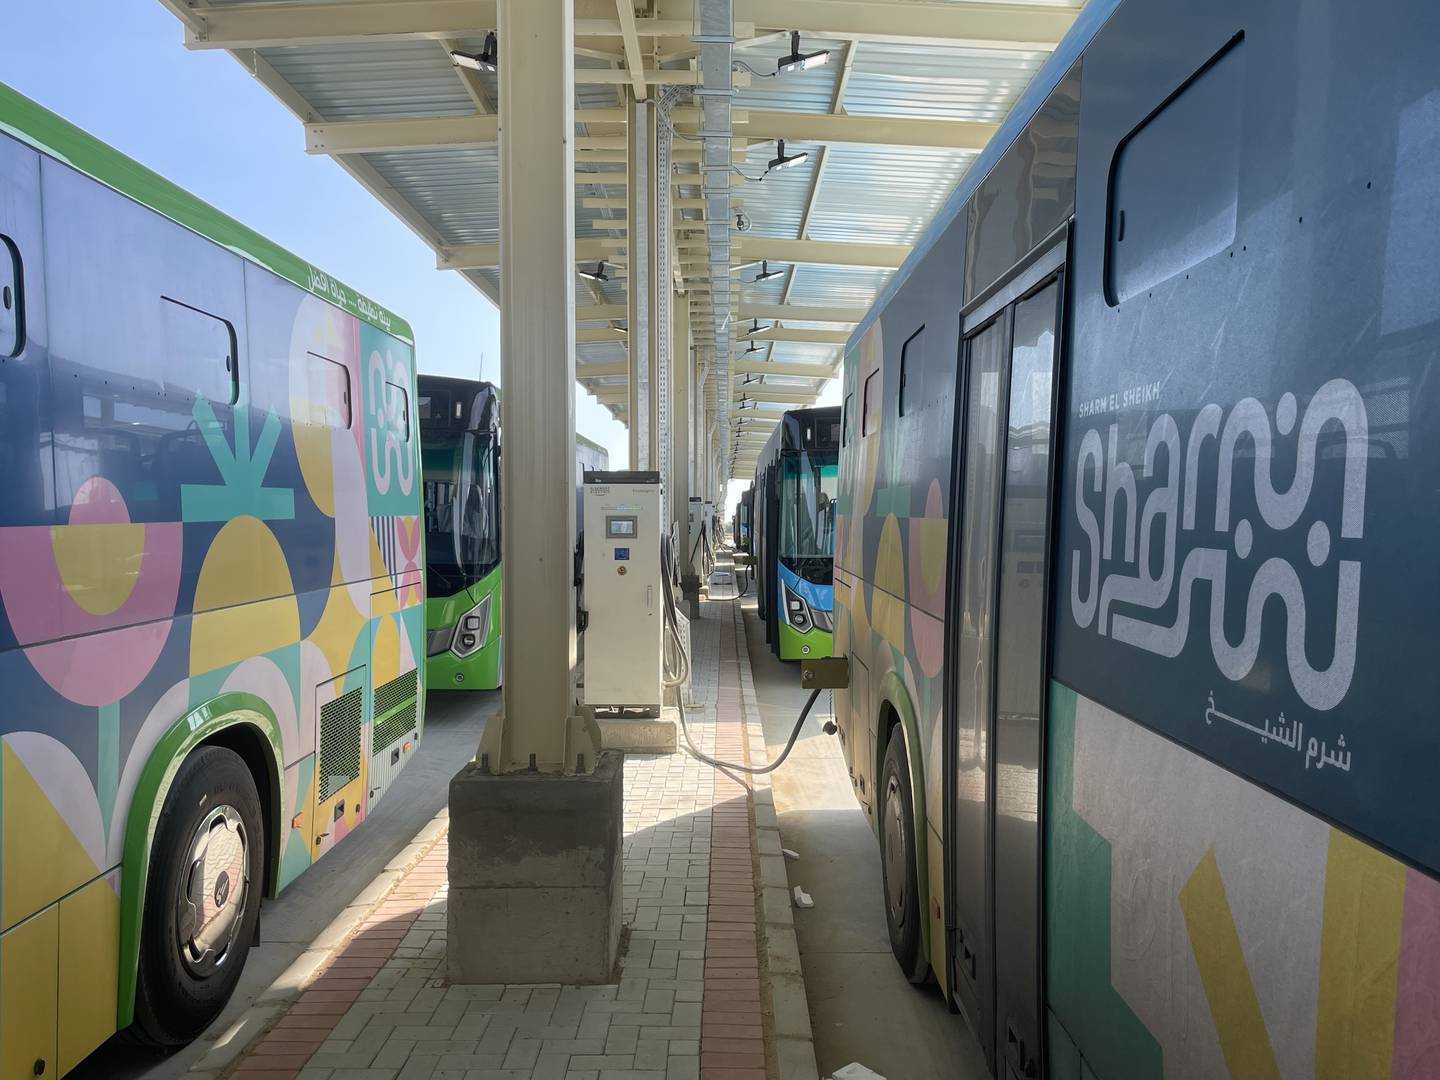 A new electric bus terminal in the Egyptian city of Sharm El Sheikh, one of the city's landmark green energy projects ahead of Cop27. Kamal Tabikha / The National.